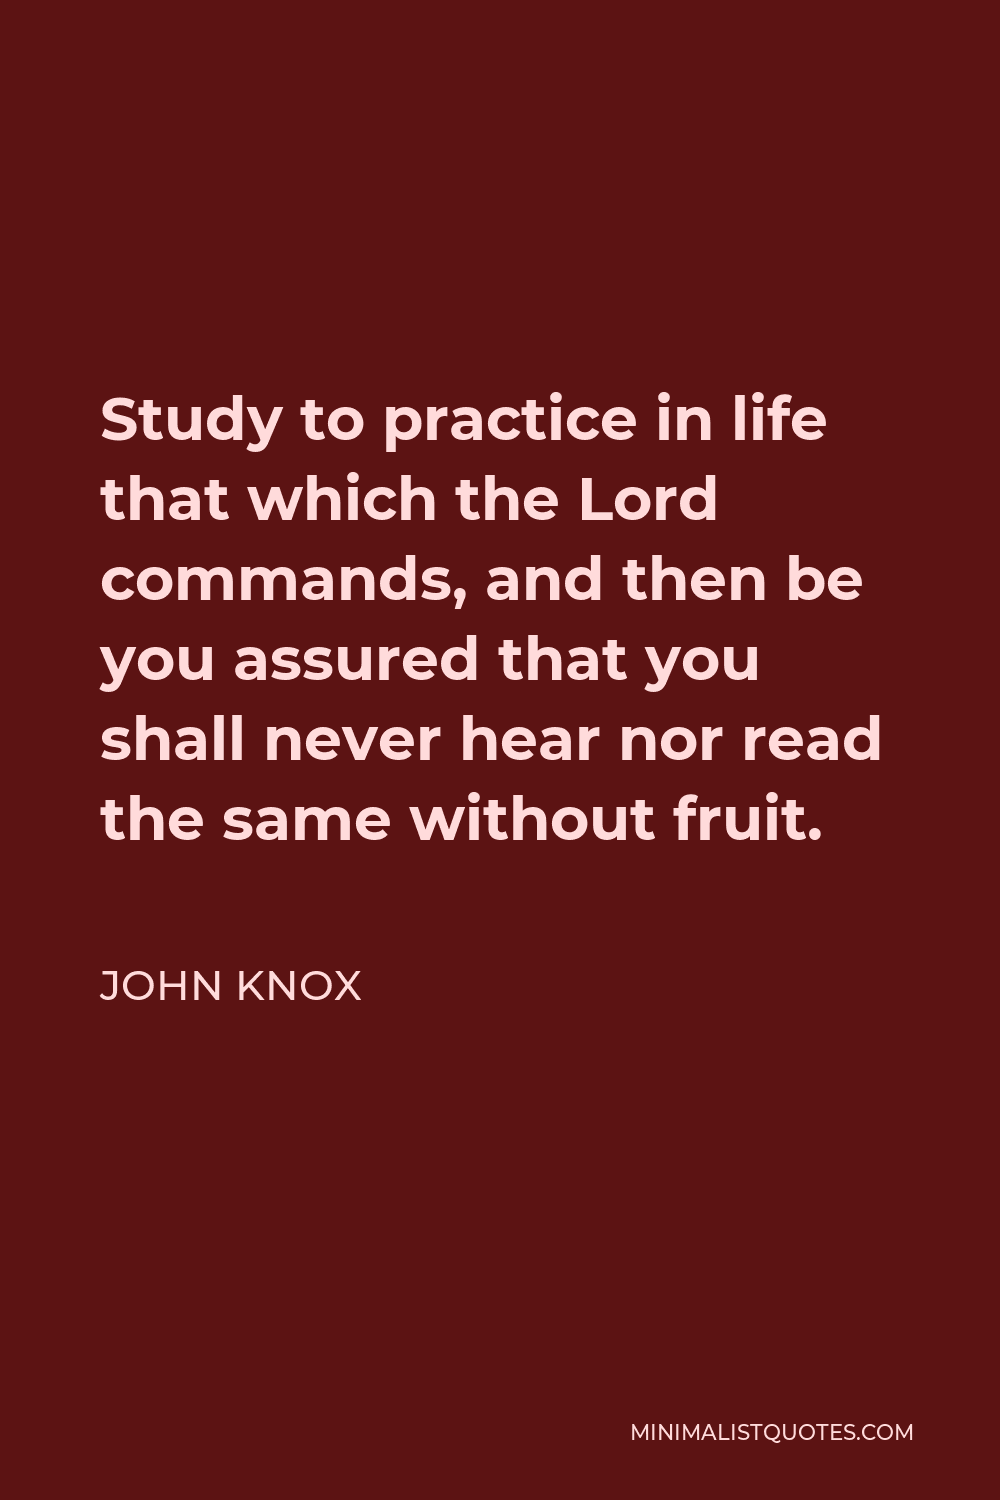 John Knox Quote - Study to practice in life that which the Lord commands, and then be you assured that you shall never hear nor read the same without fruit.